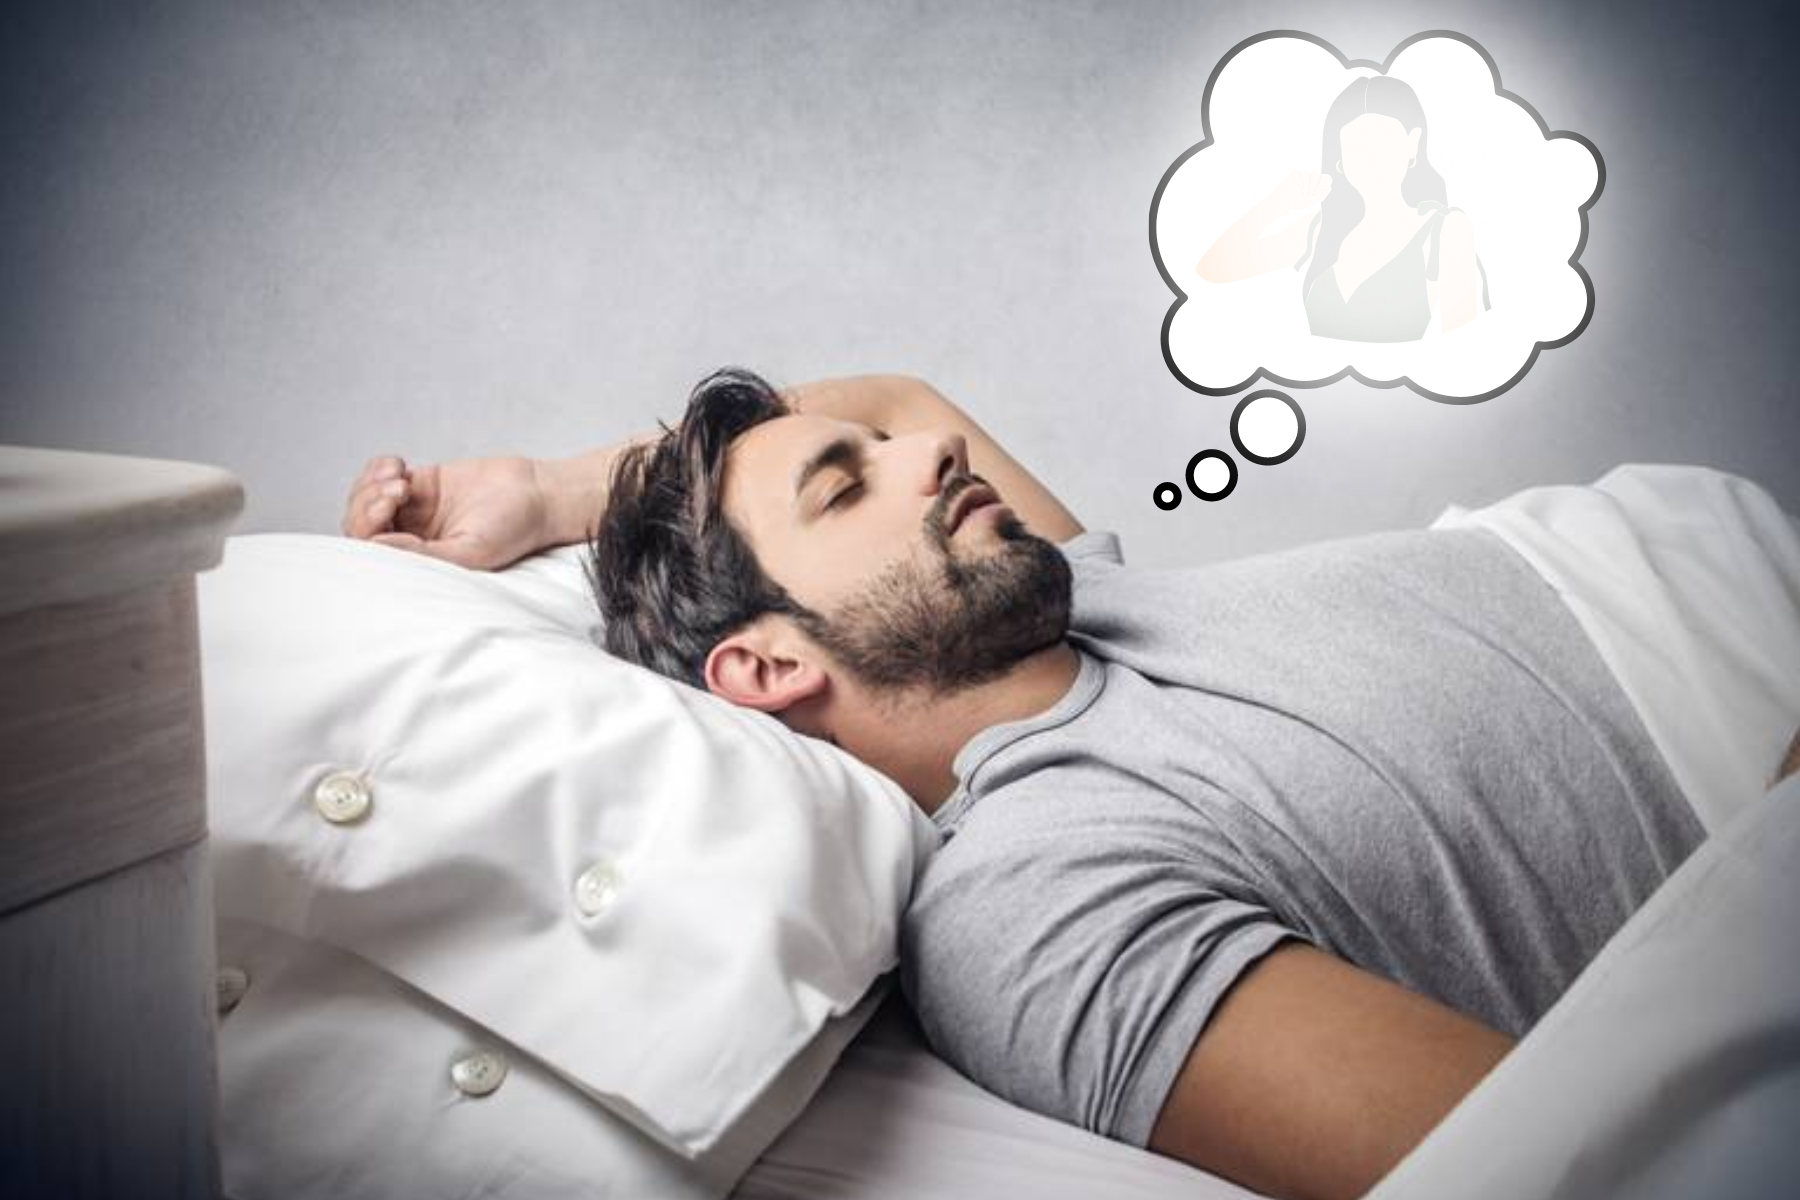 Why You Can't Remember Your Dreams - A Scientific Explanation